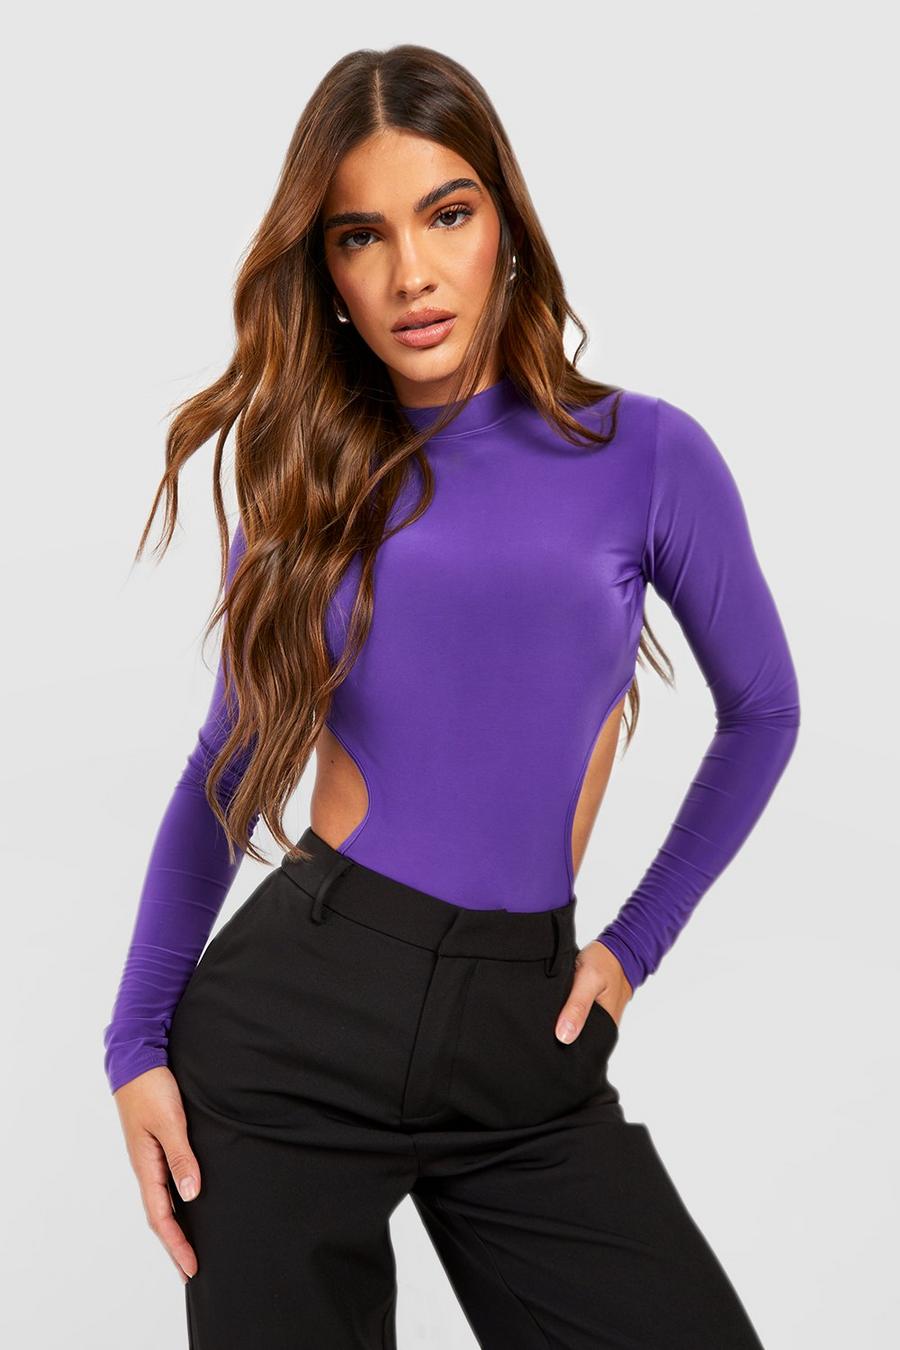 Women lose it over ridiculously high-cut 'front wedgie' bodysuit from  Boohoo.com